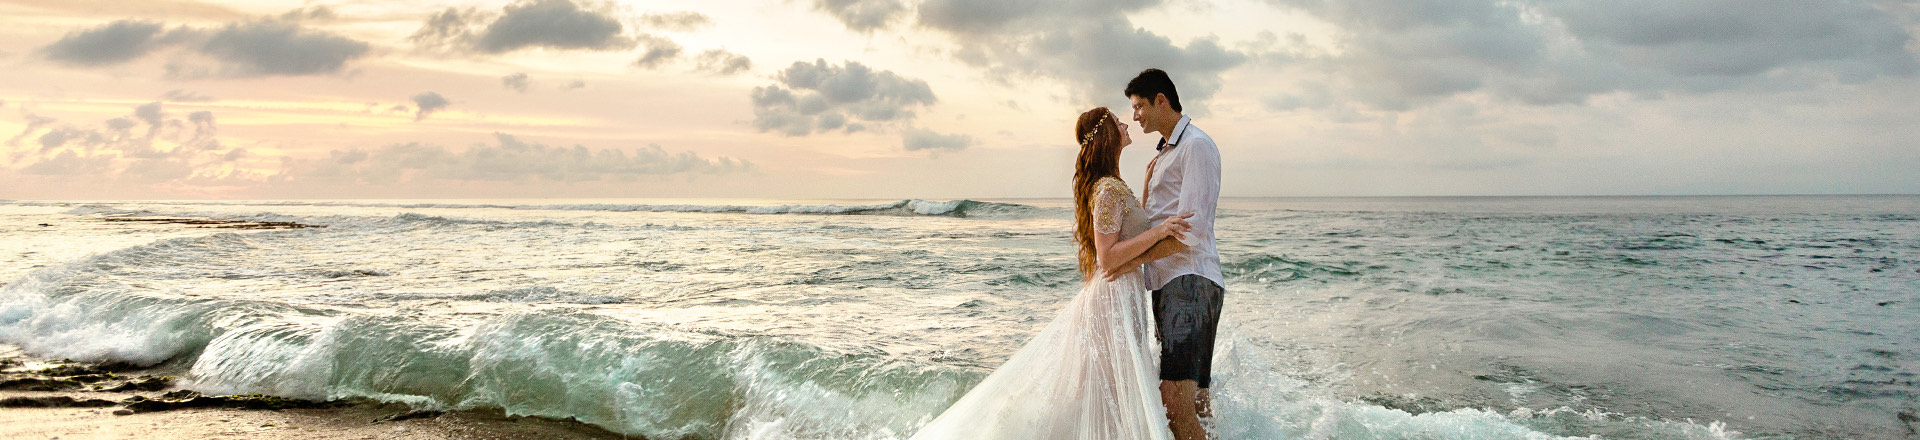 bride and groom embraced in each other's arms standing on edge of beach with waves crashing at shore, romantic cloud sunsetting in distance